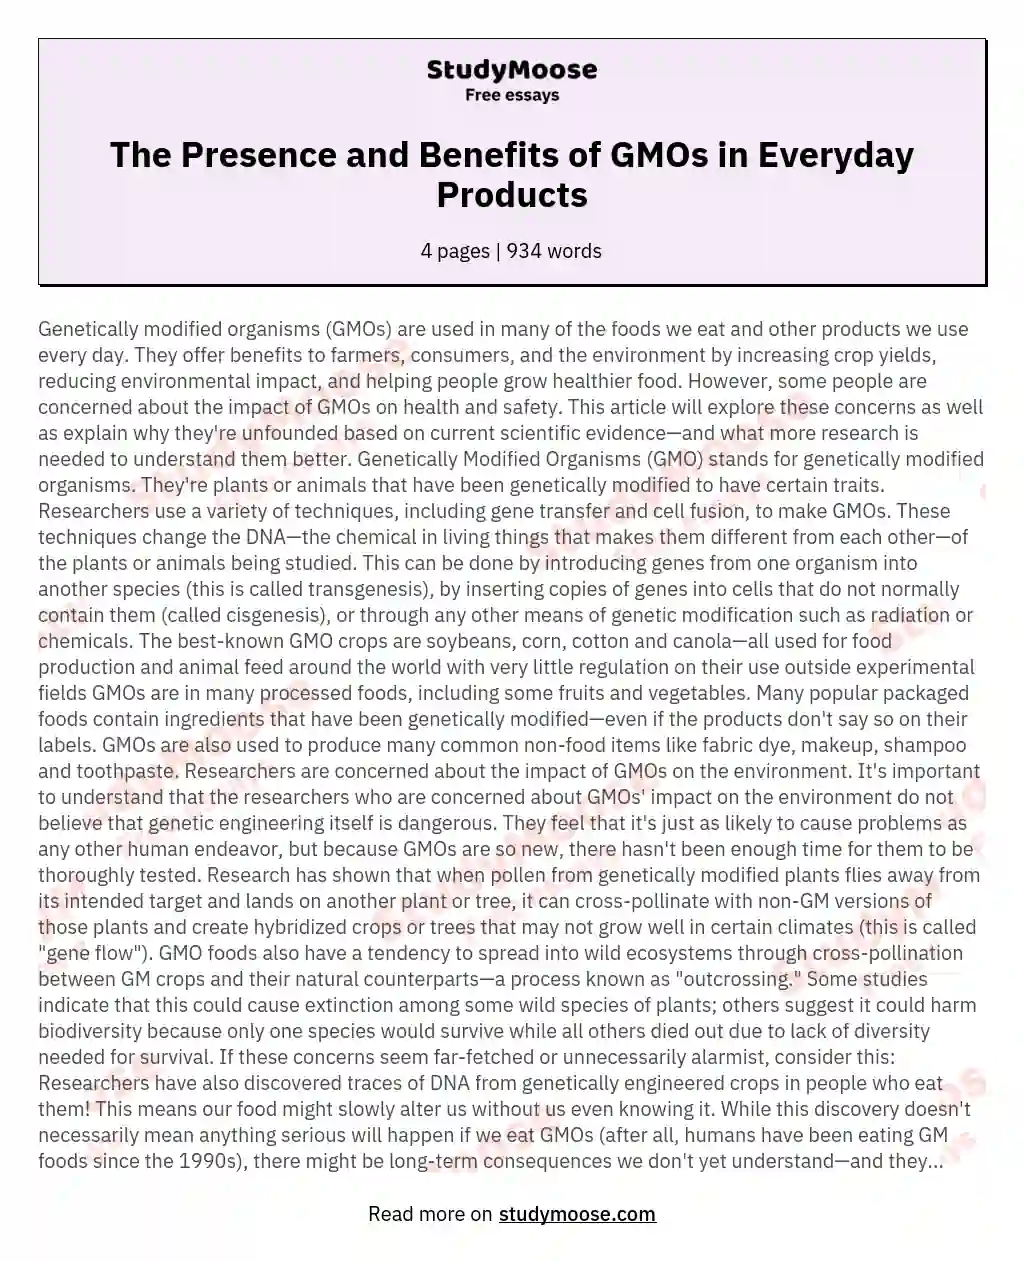 The Presence and Benefits of GMOs in Everyday Products essay